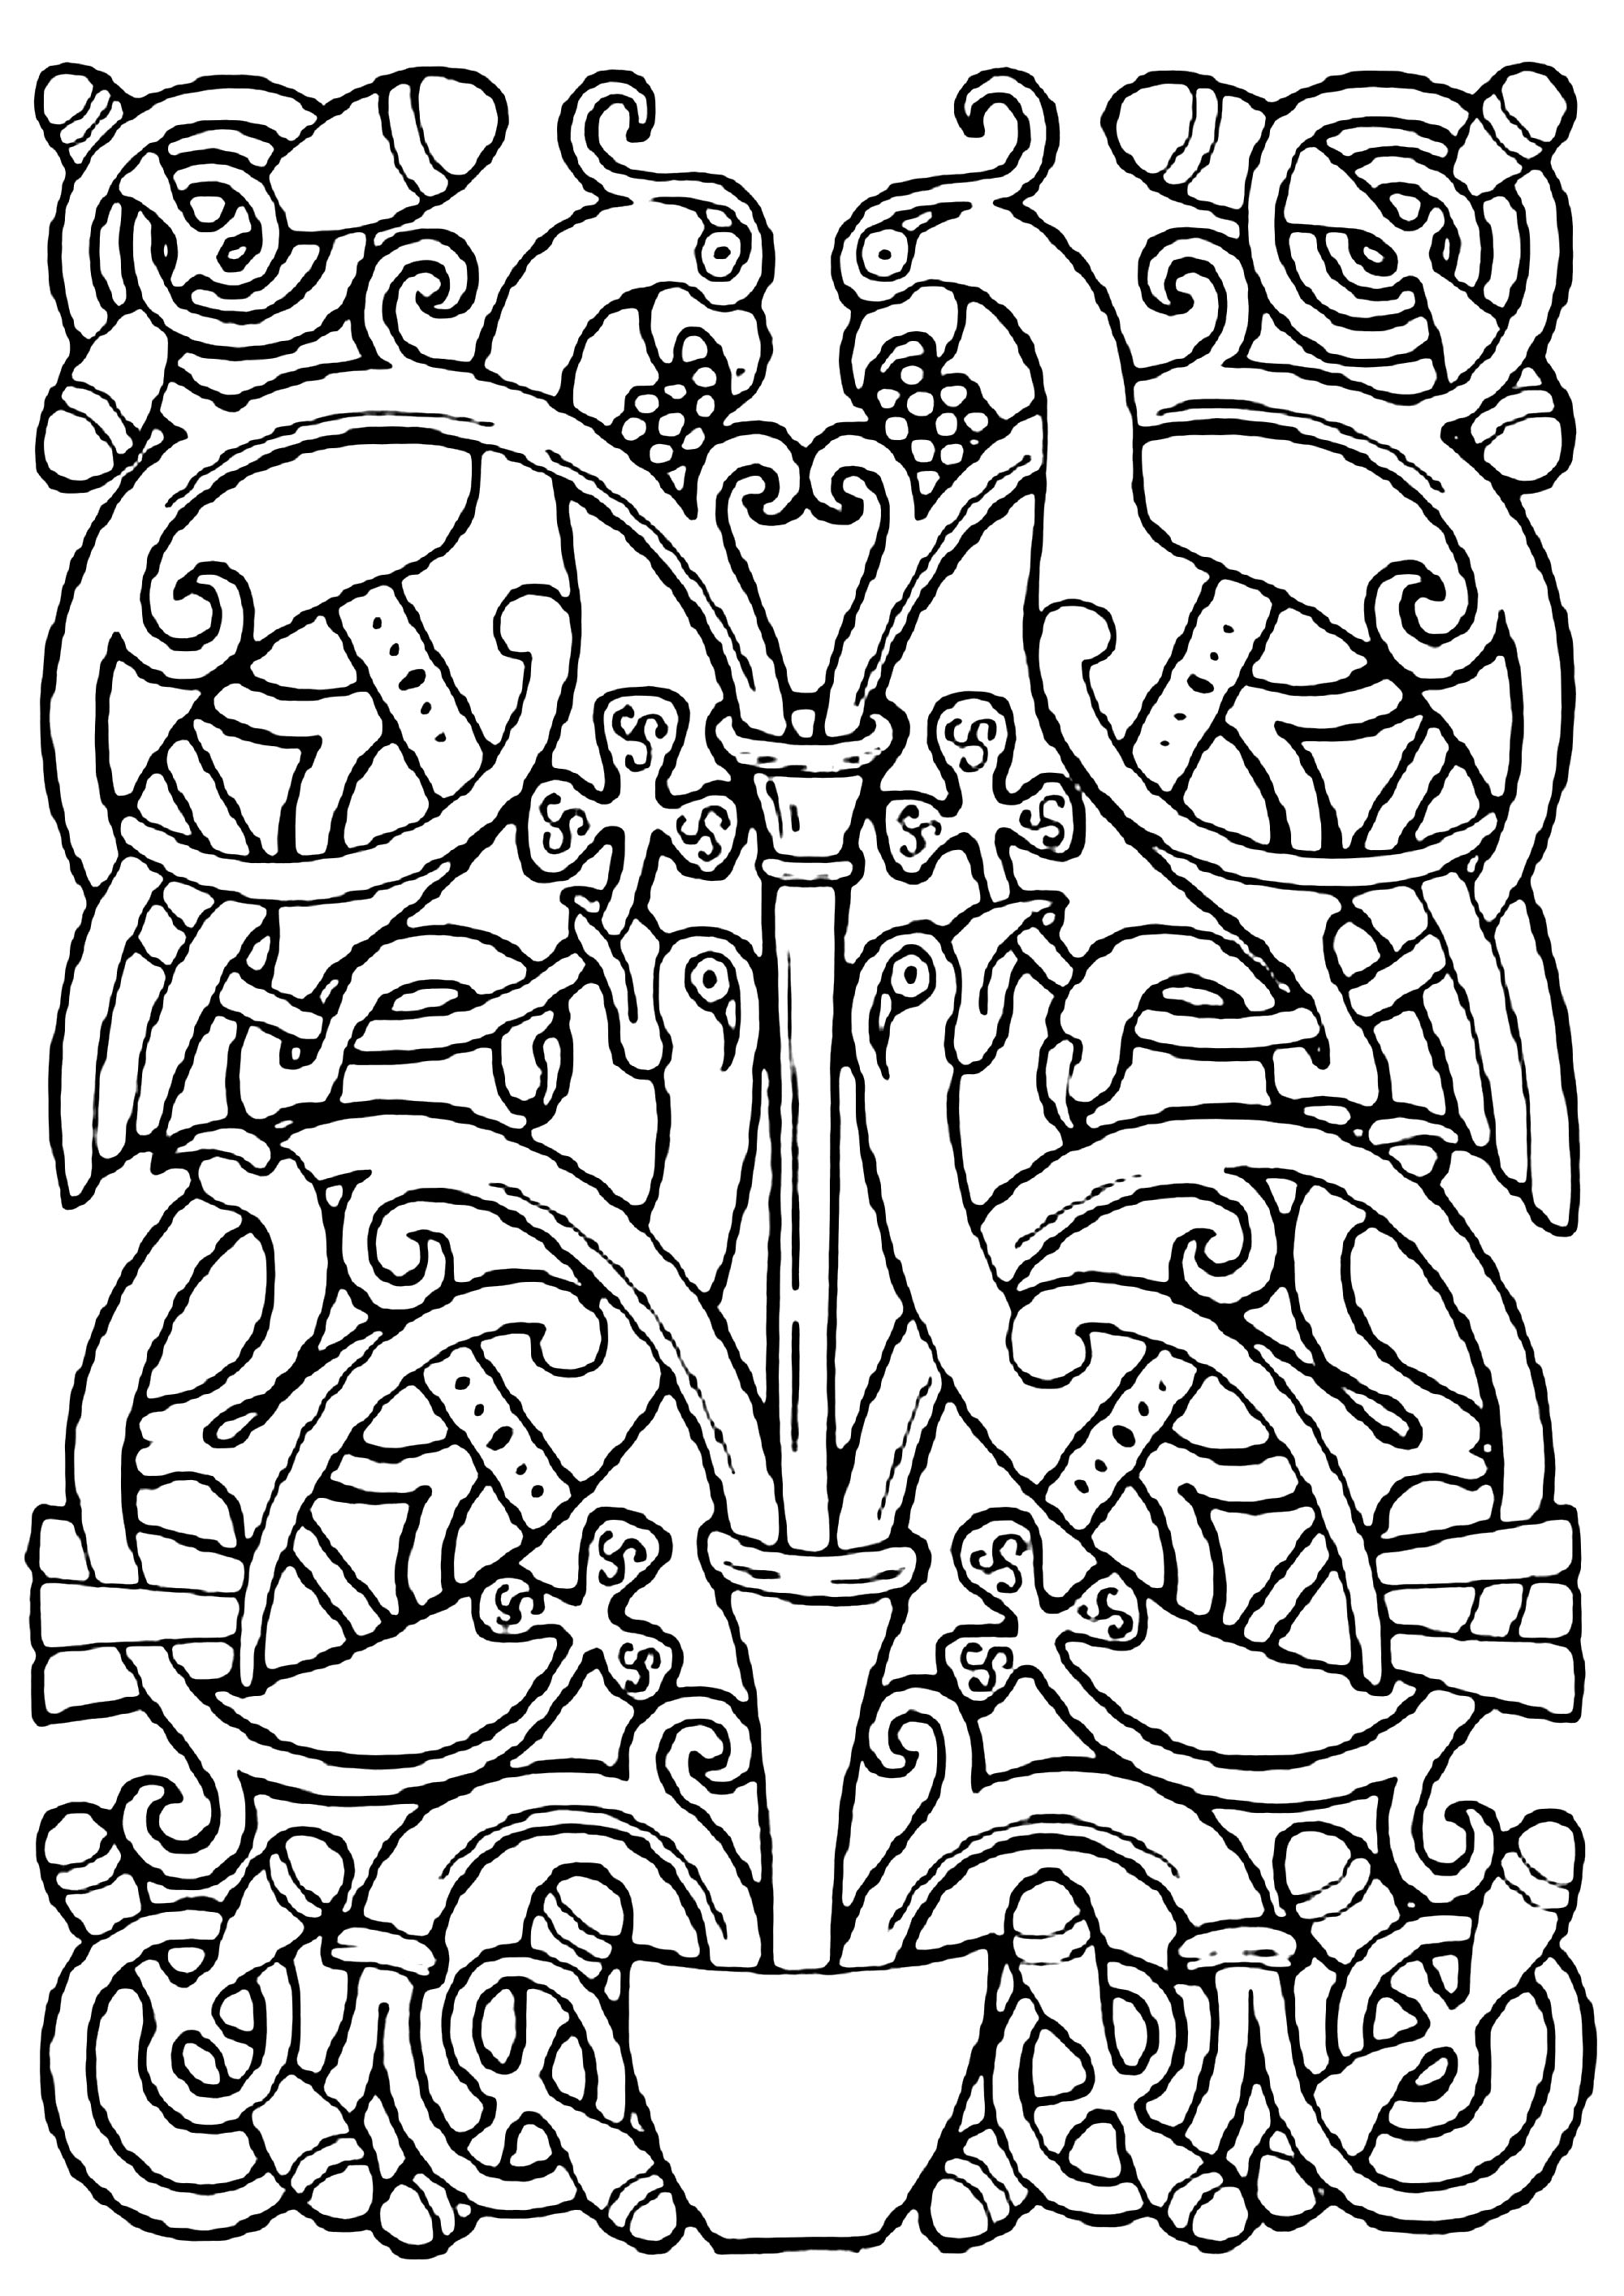 Celtic design of birds, with interwoven Celtic designs.This illustration looks like those found in medieval manuscripts such as The Book of Kells.